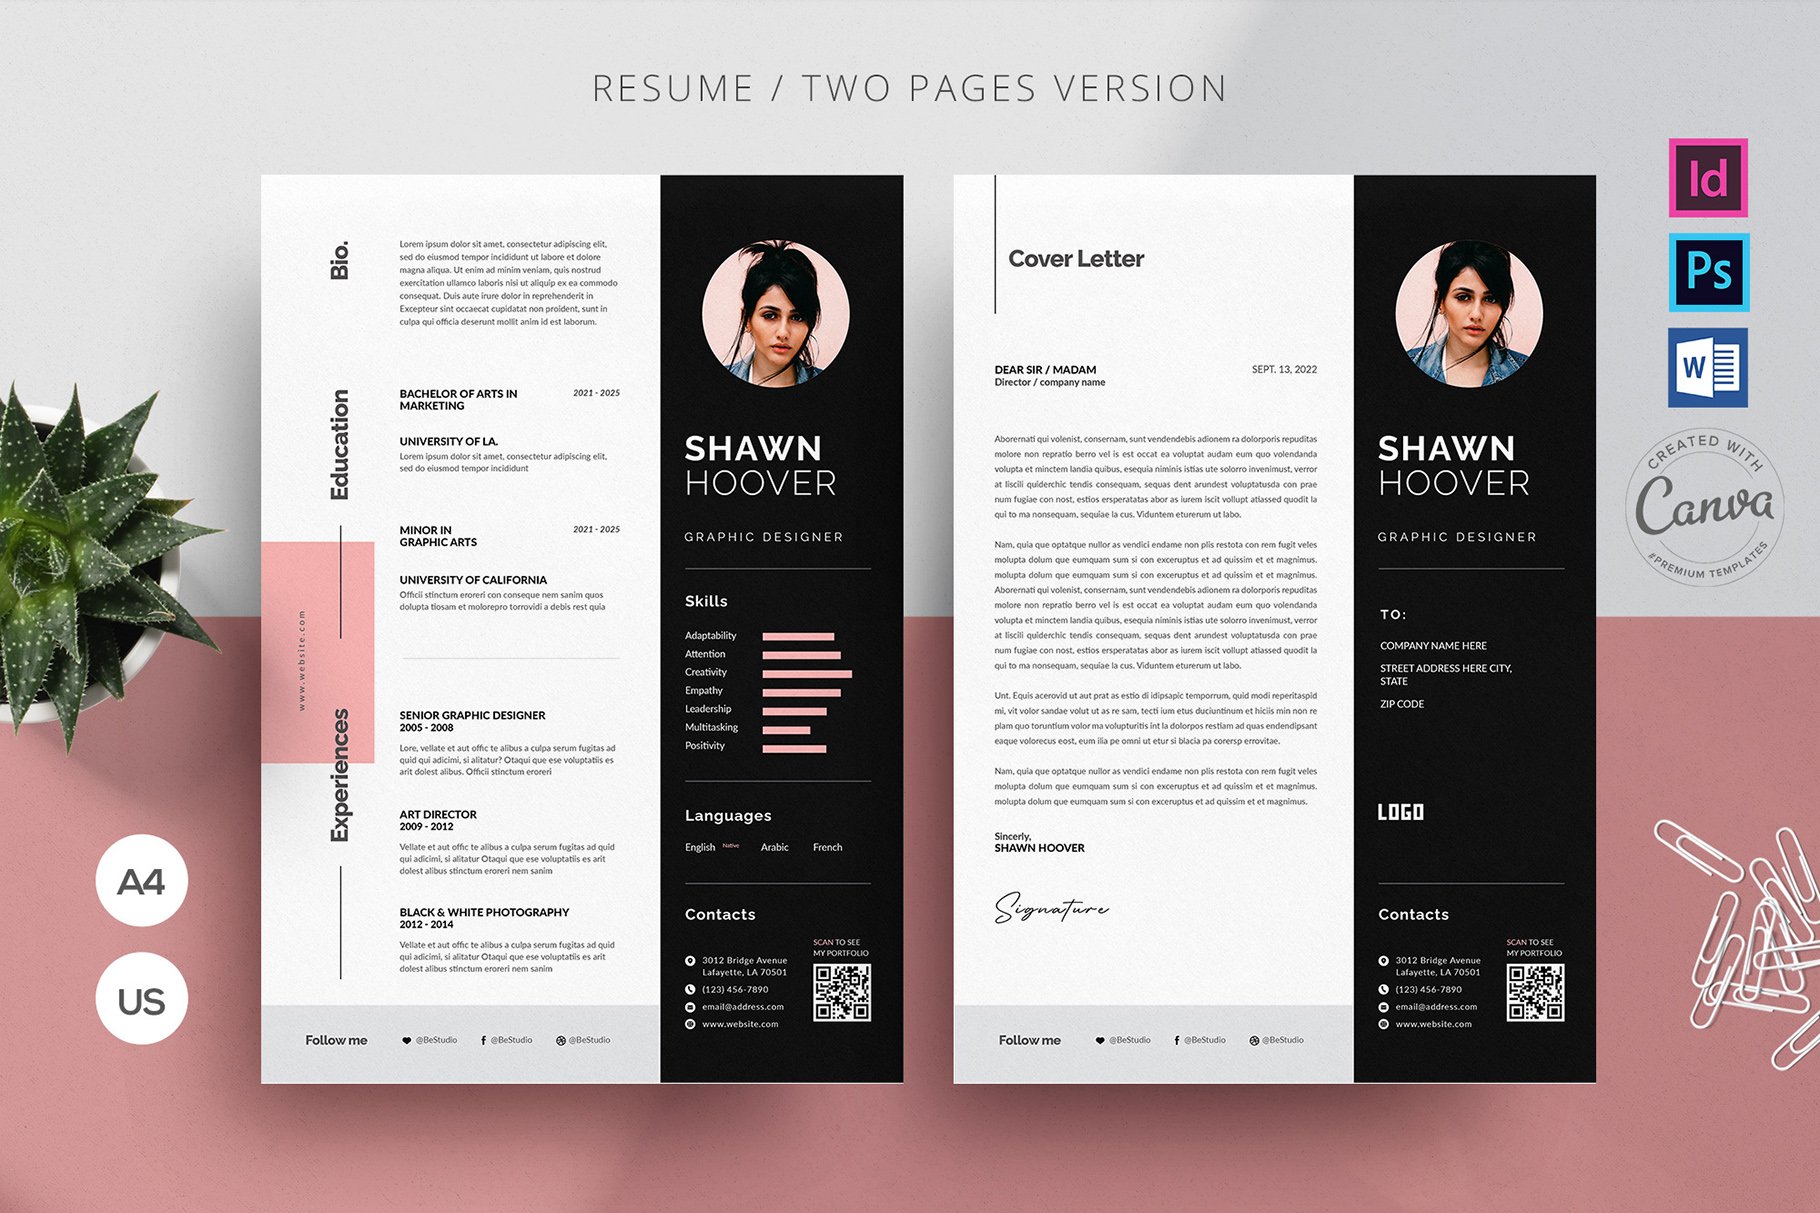 Resume Template | DOCX, PSD, INDD cover image.